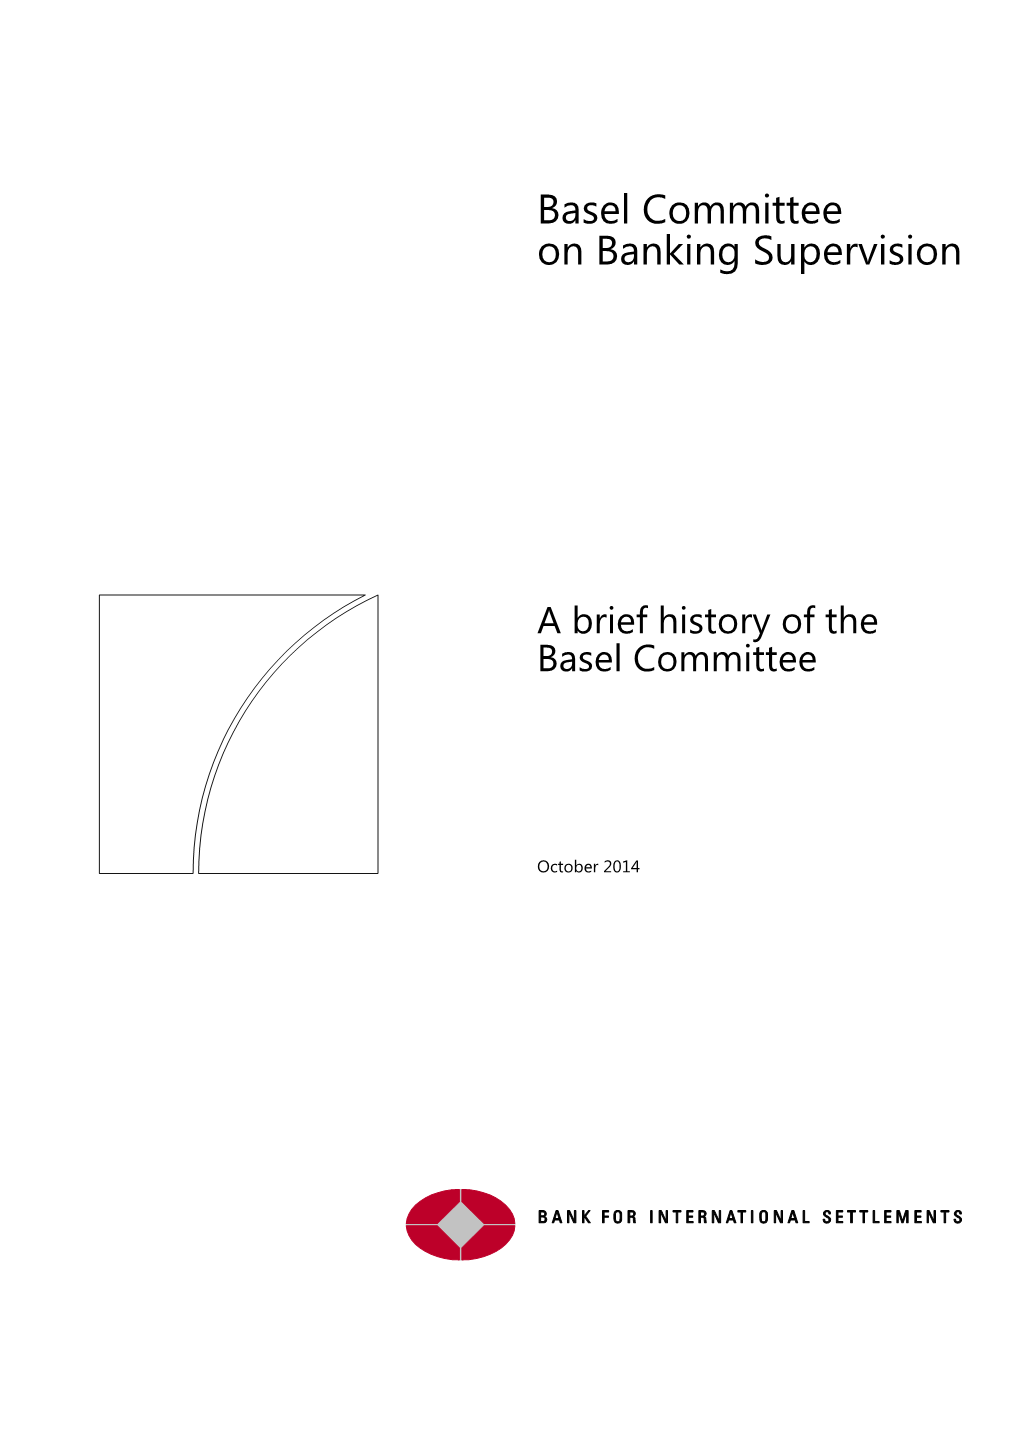 A Brief History of the Basel Committee